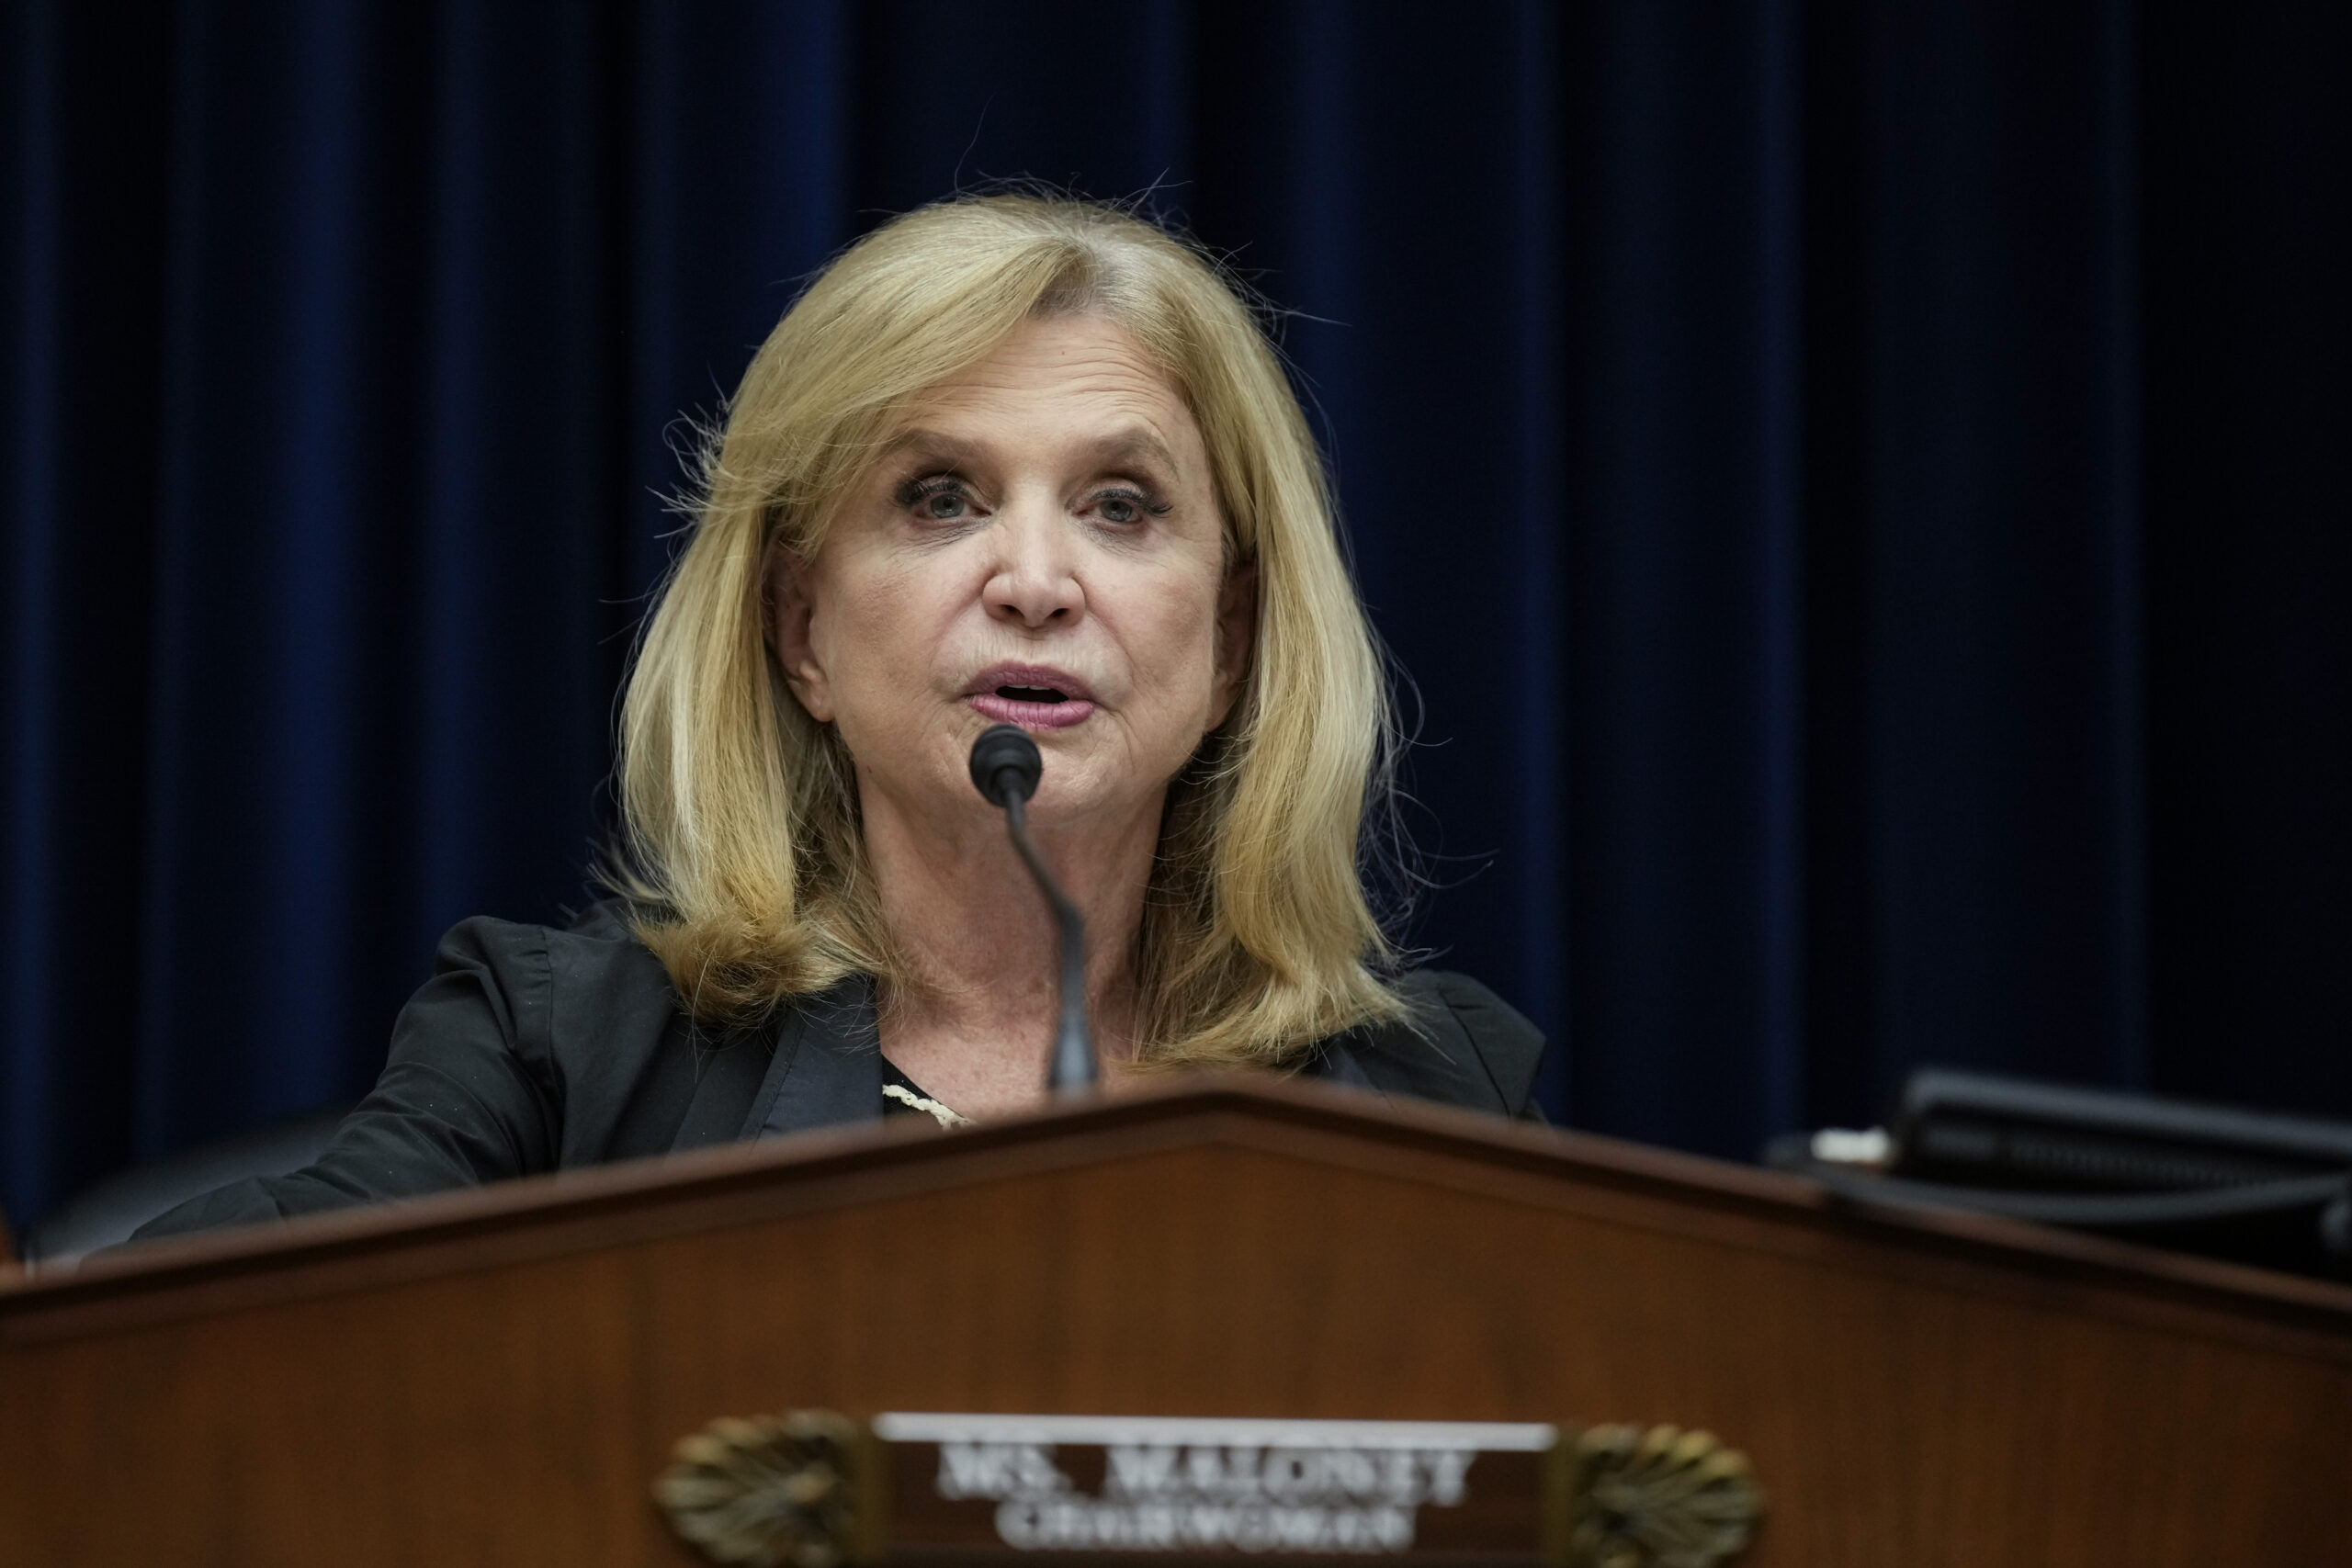 U.S. Rep. Carolyn Maloney (D-NY), chairwoman of the House Committee on Oversight and Reform. Credit: Drew Angerer/Getty Images.